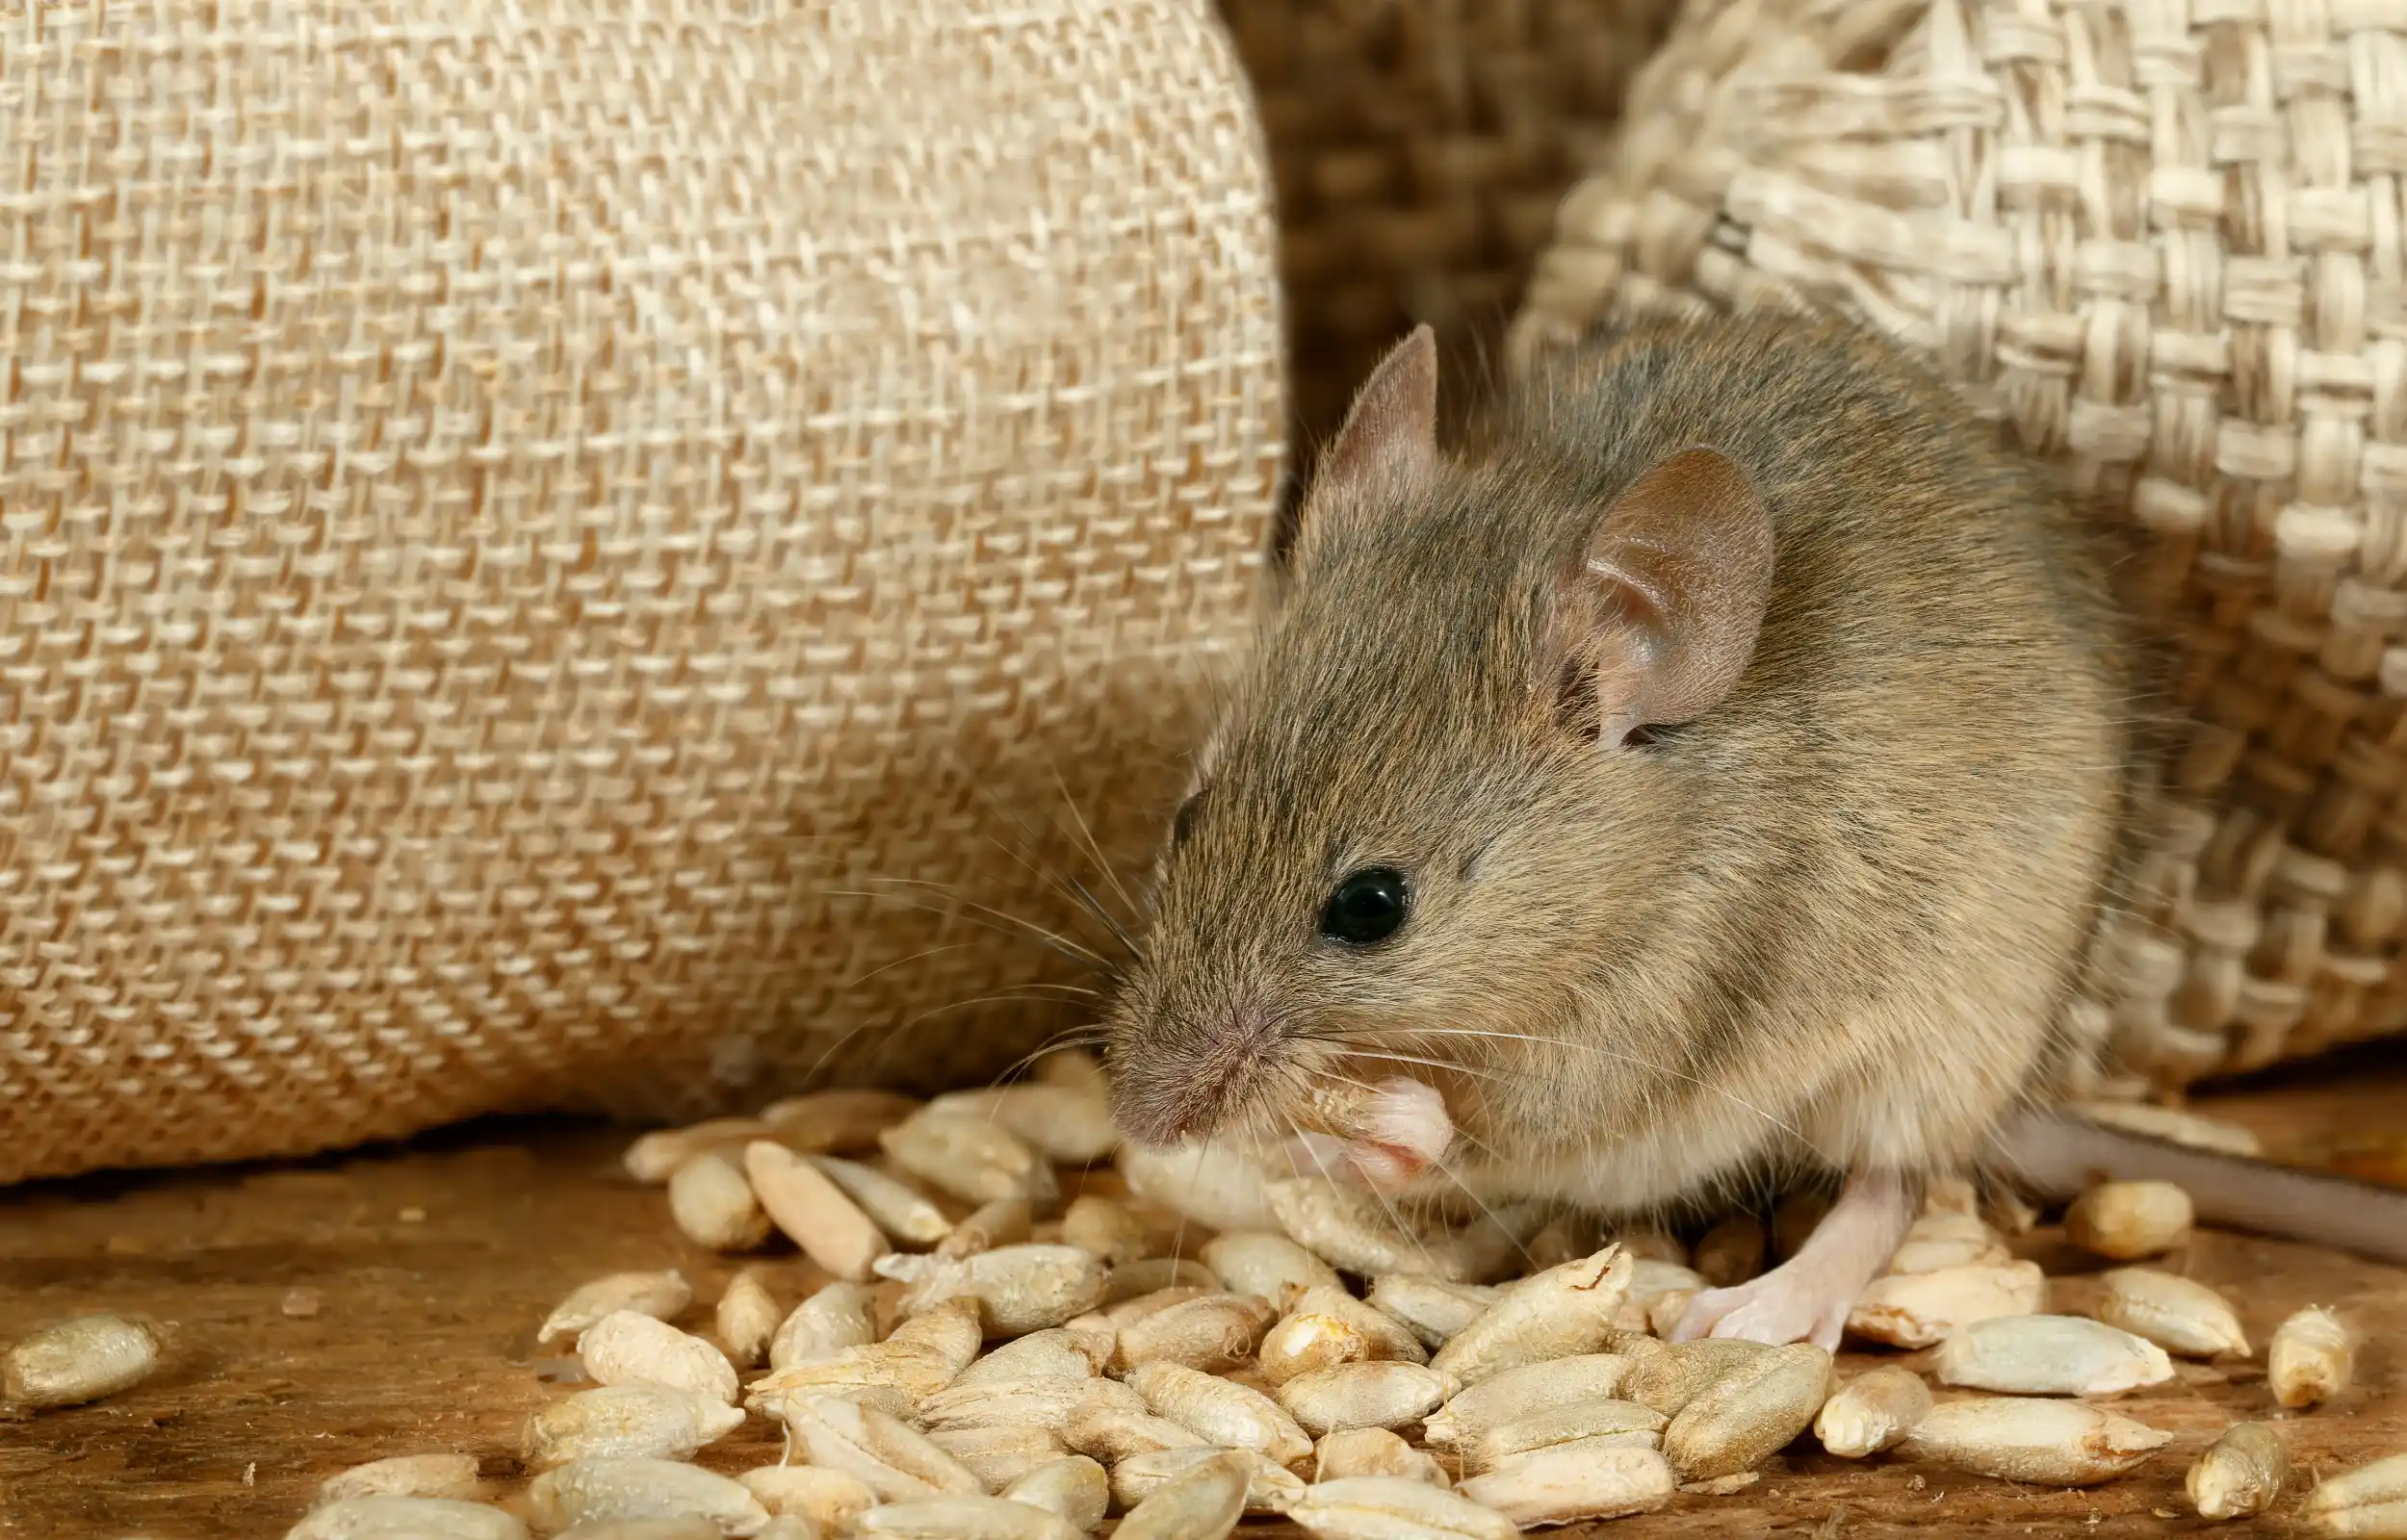 Rats are intelligent and social creatures